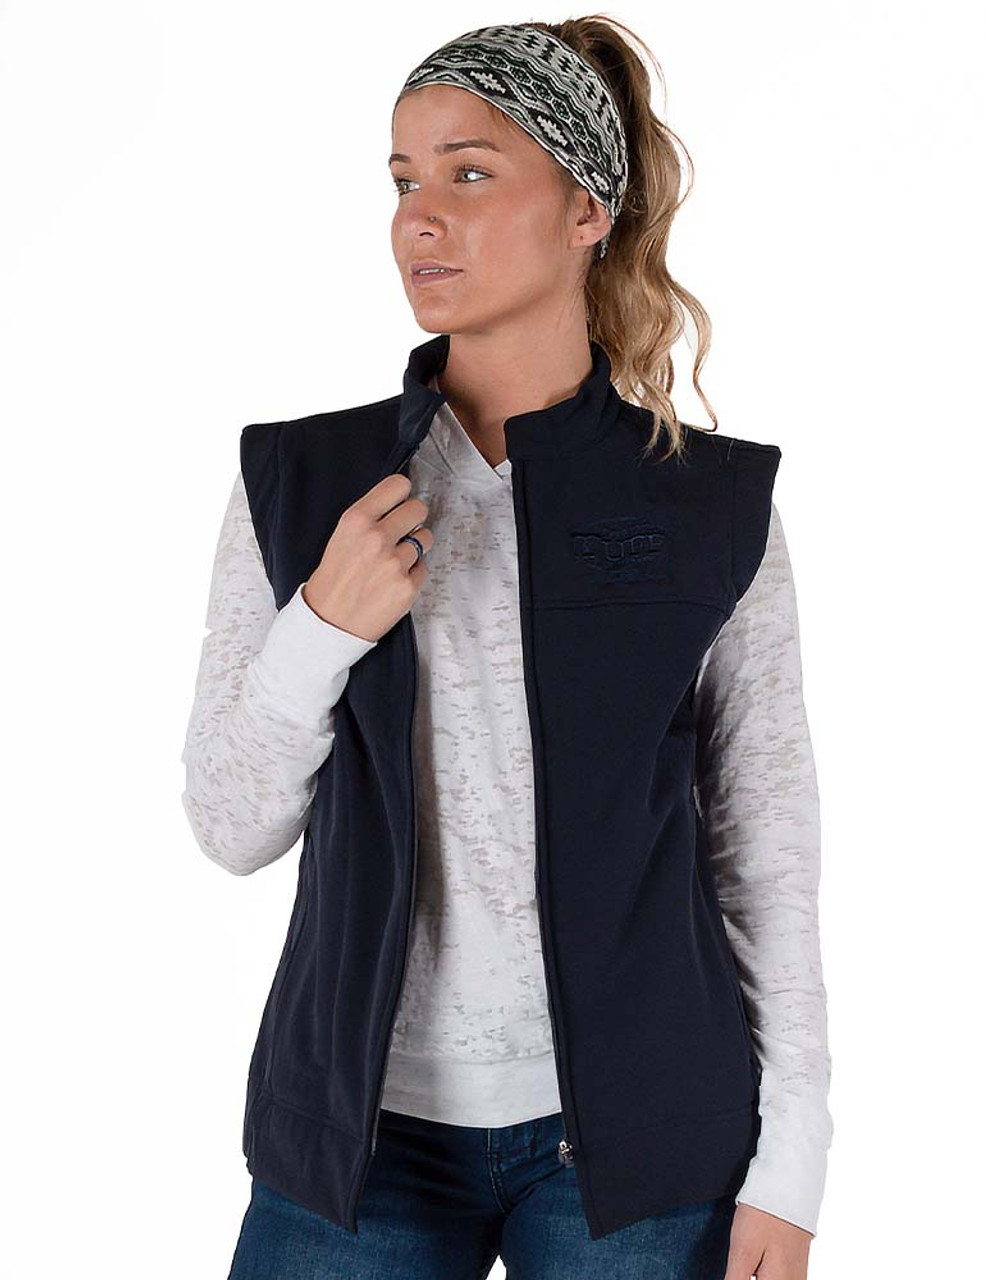 Stretch microfiber vest with embroidered logo (navy) - Cowgirl